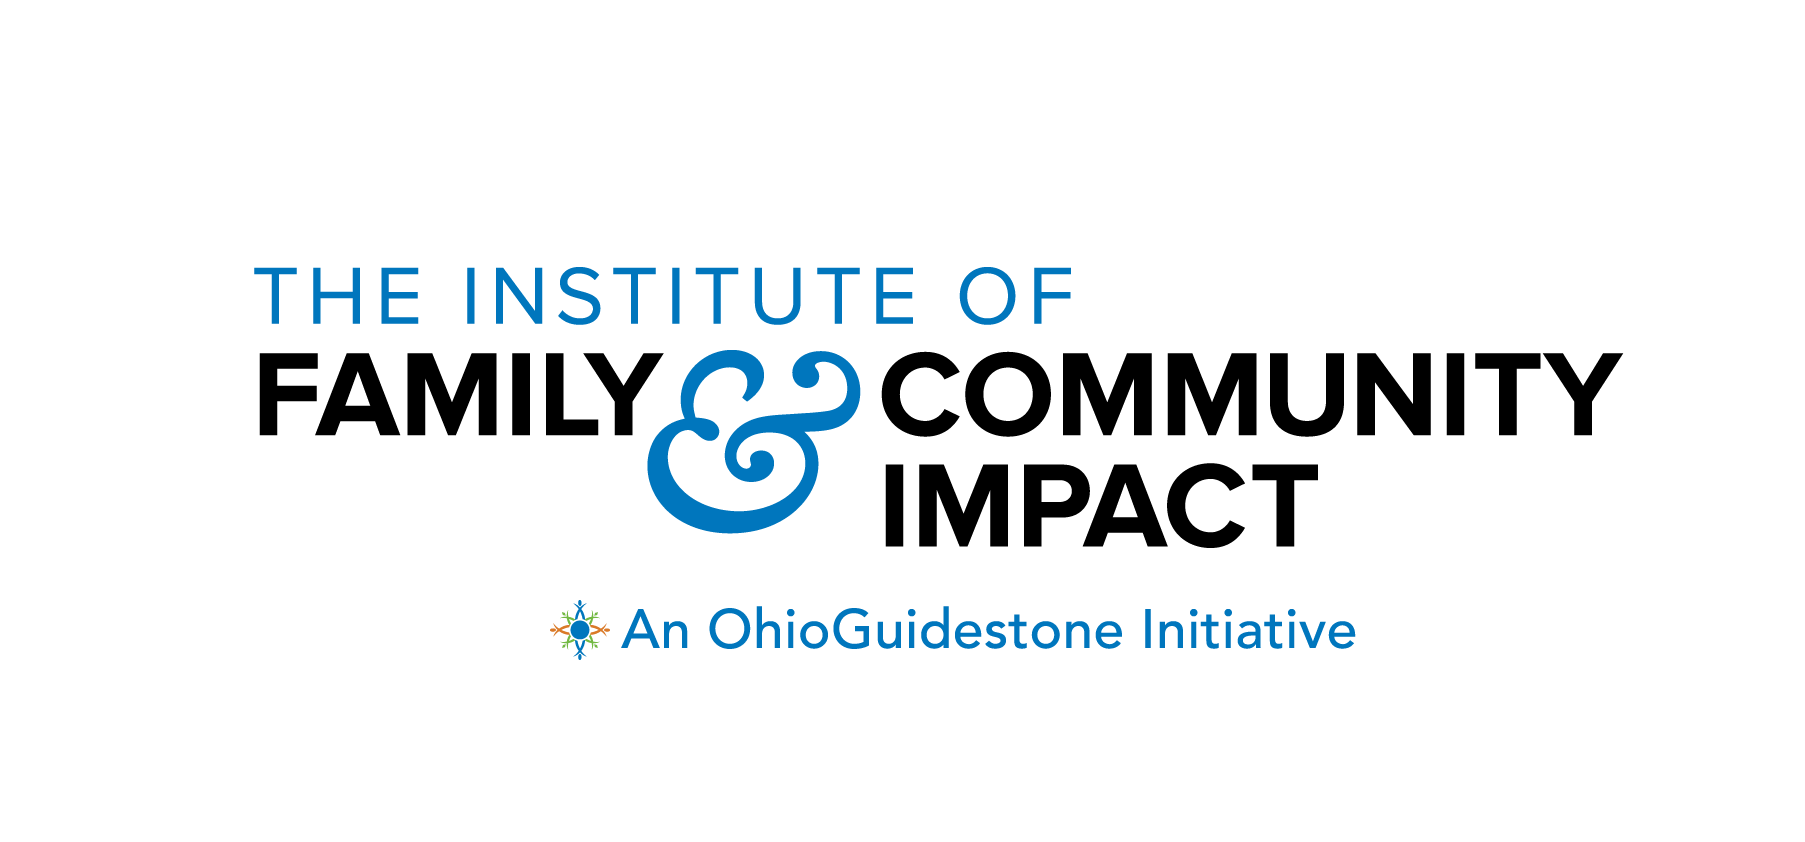 The Institue of Family and Community Impact